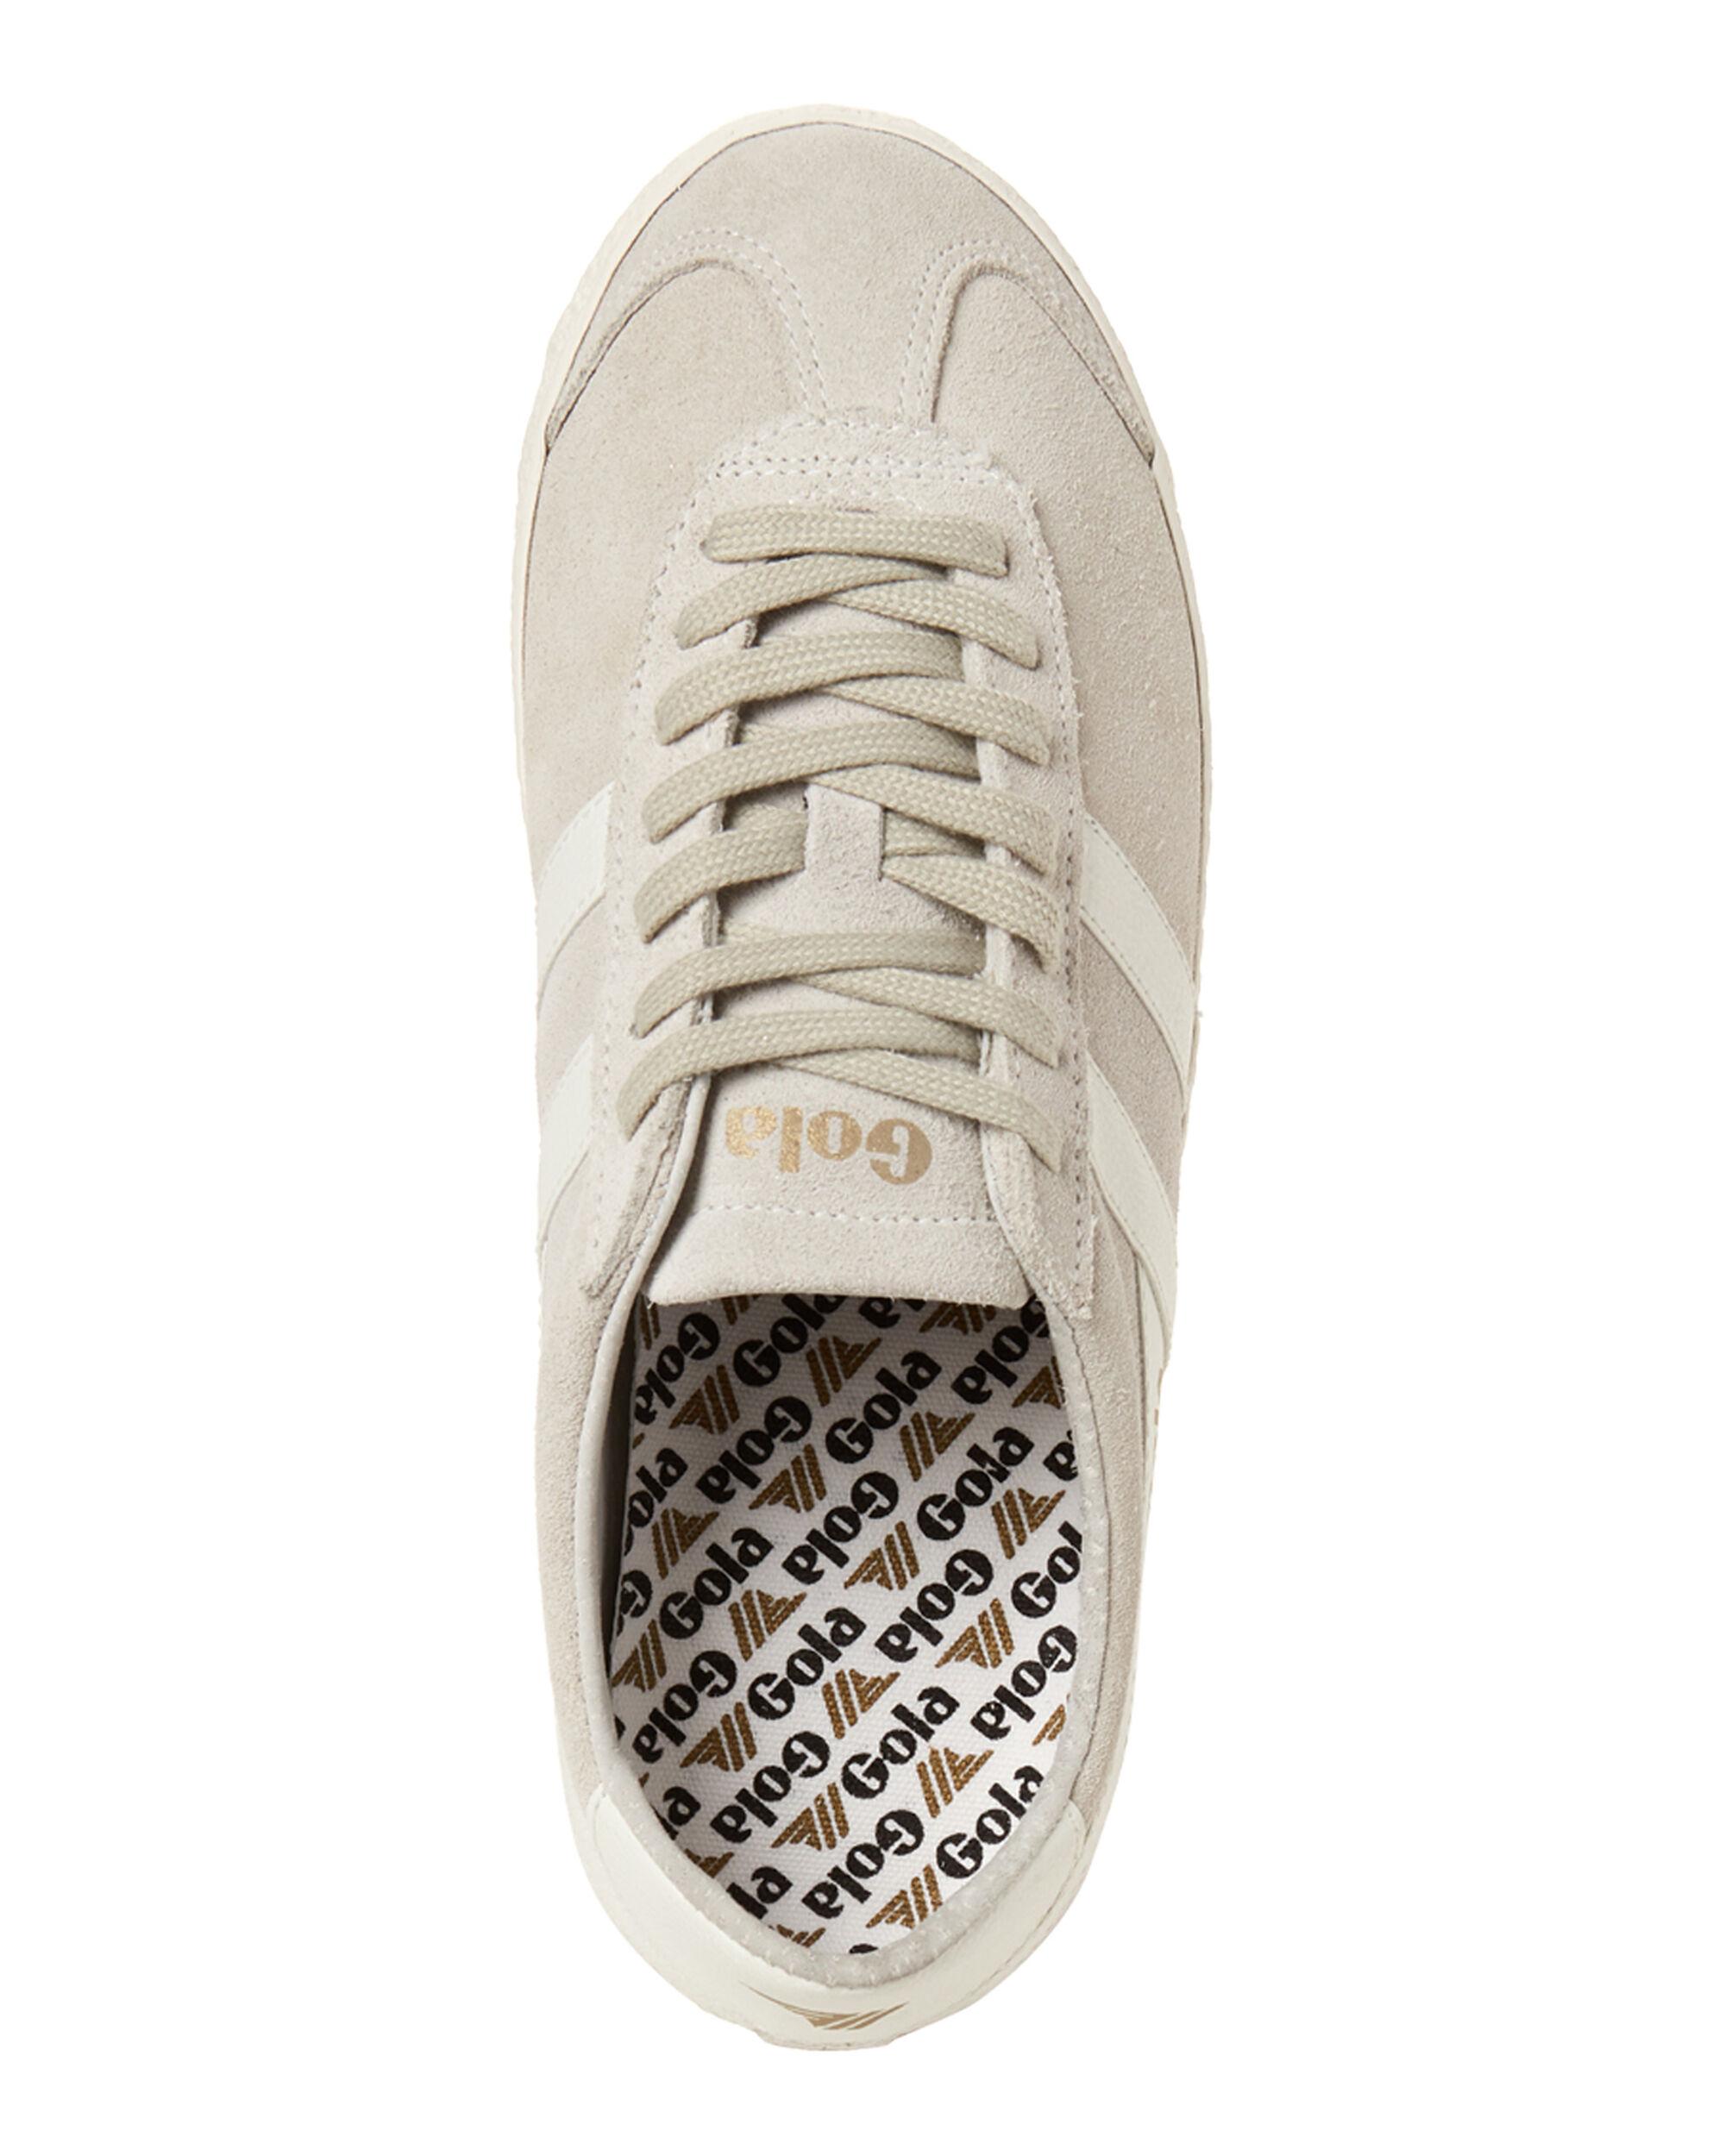 Gola Off-white & White Specialist Suede Low-top Sneakers - Lyst